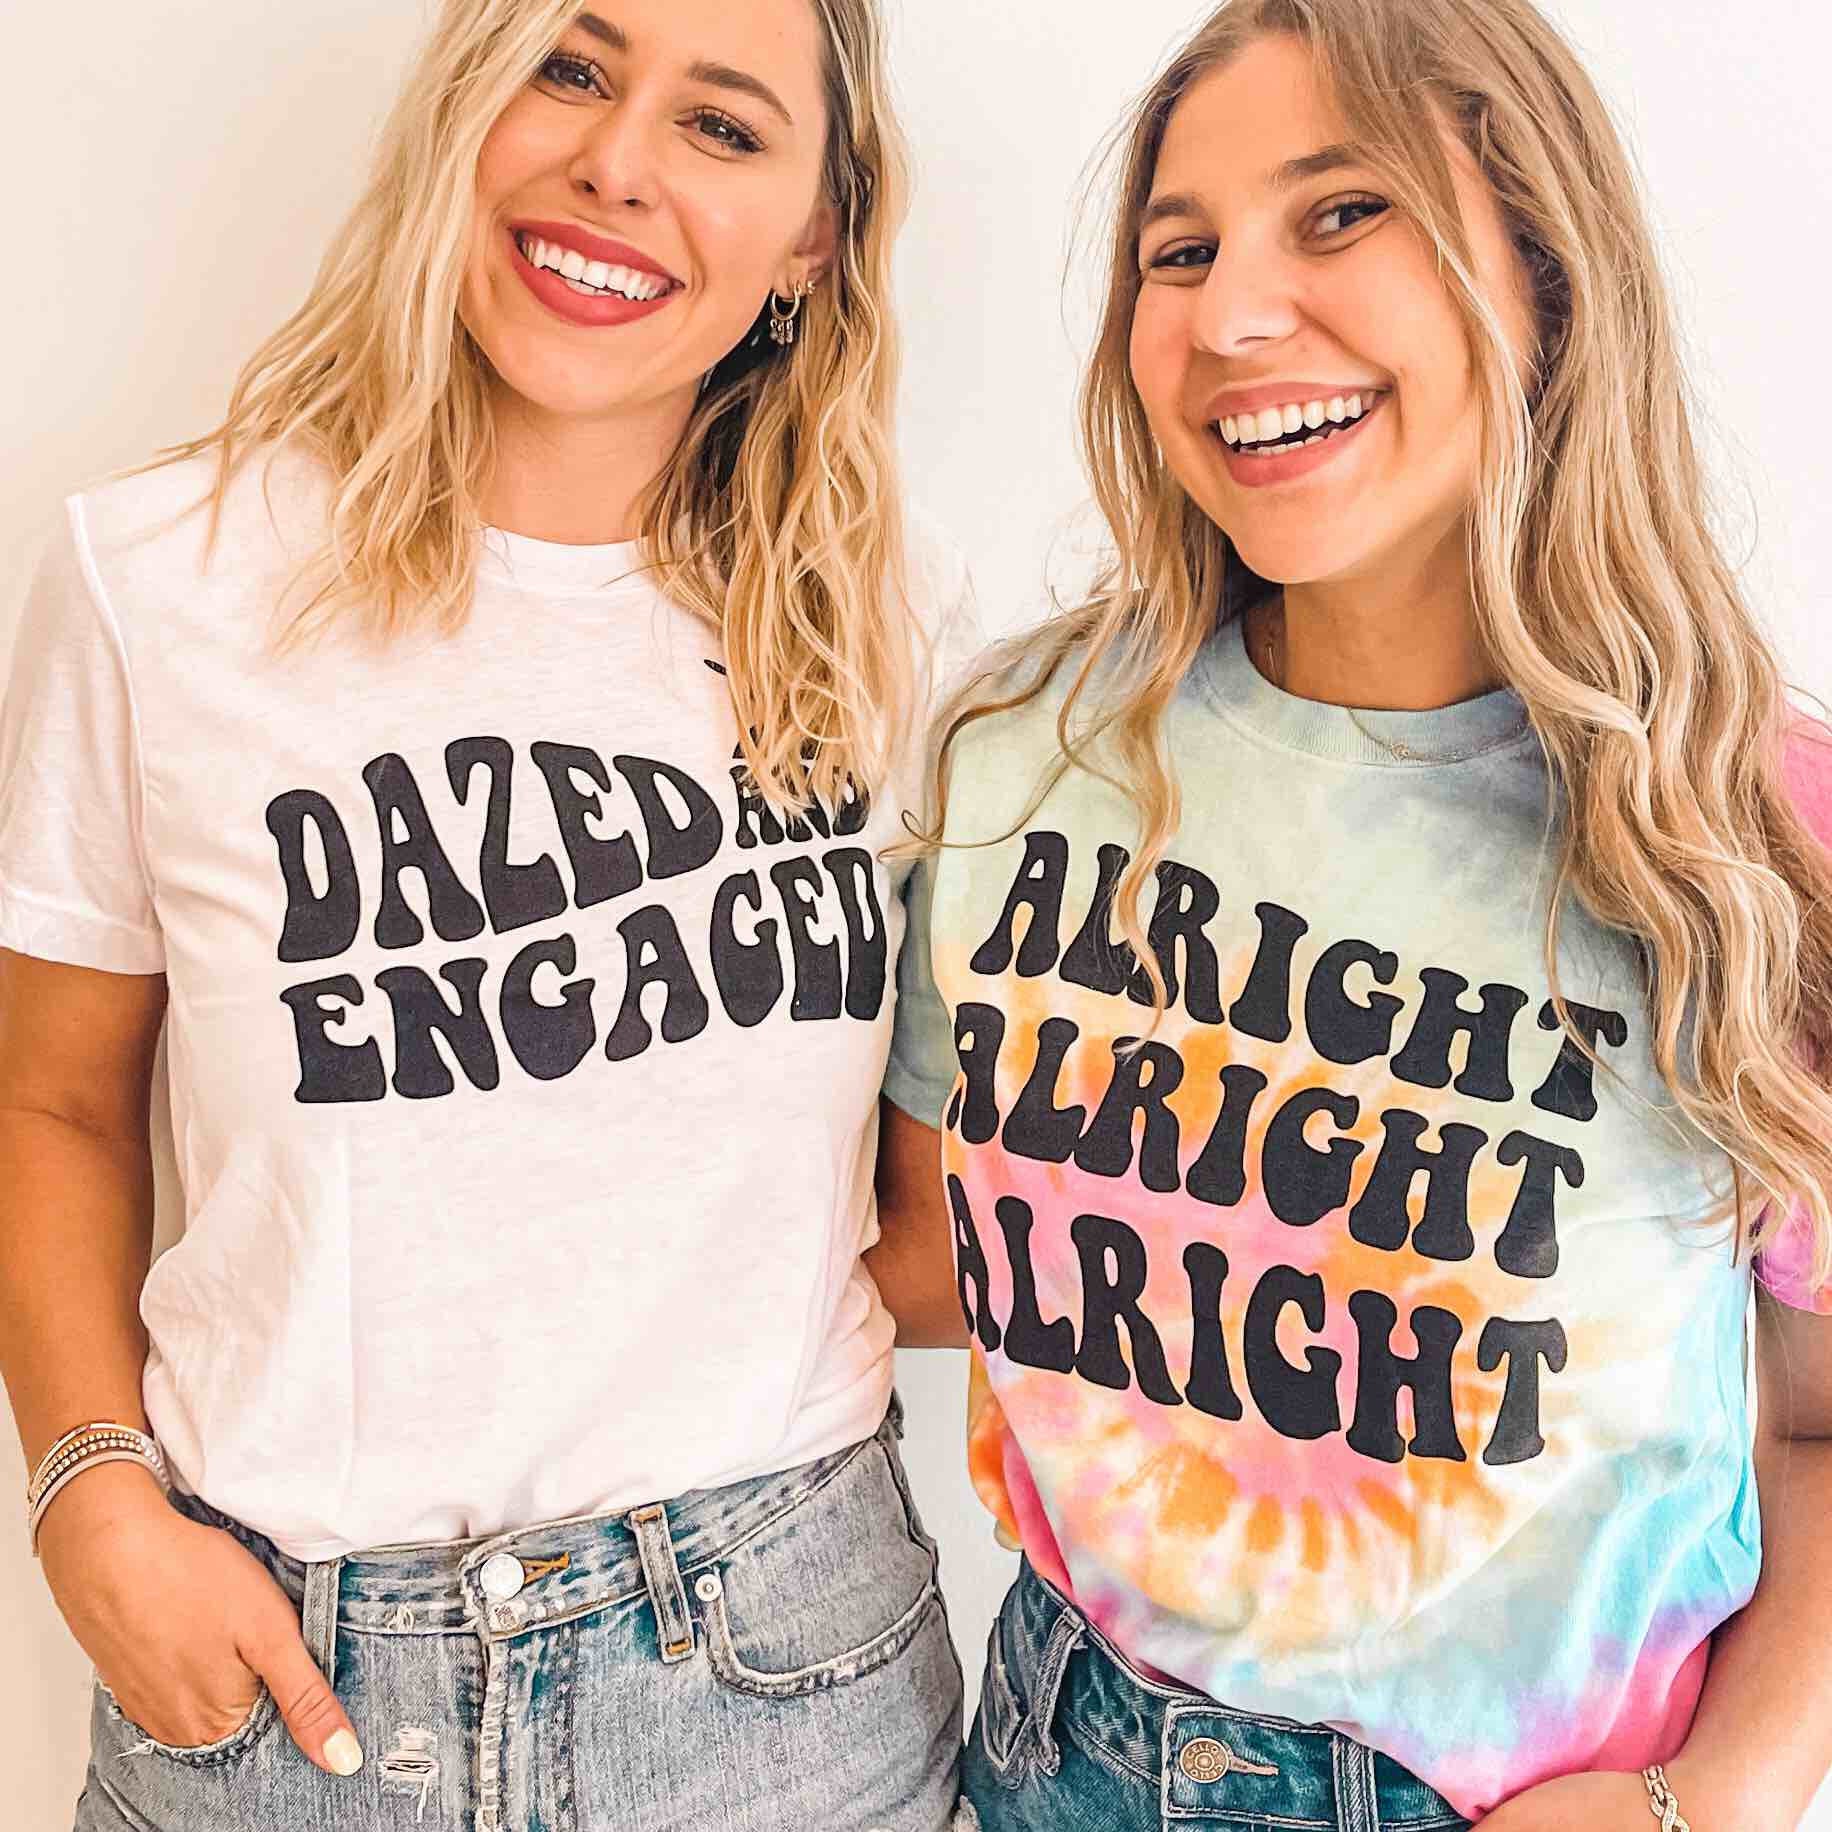 Dazed and Engaged Bachelorette Party T-Shirts  Hippie Bridal  Retro Bridesmaid Tie-Dye Tee  Stoner Wedding Party